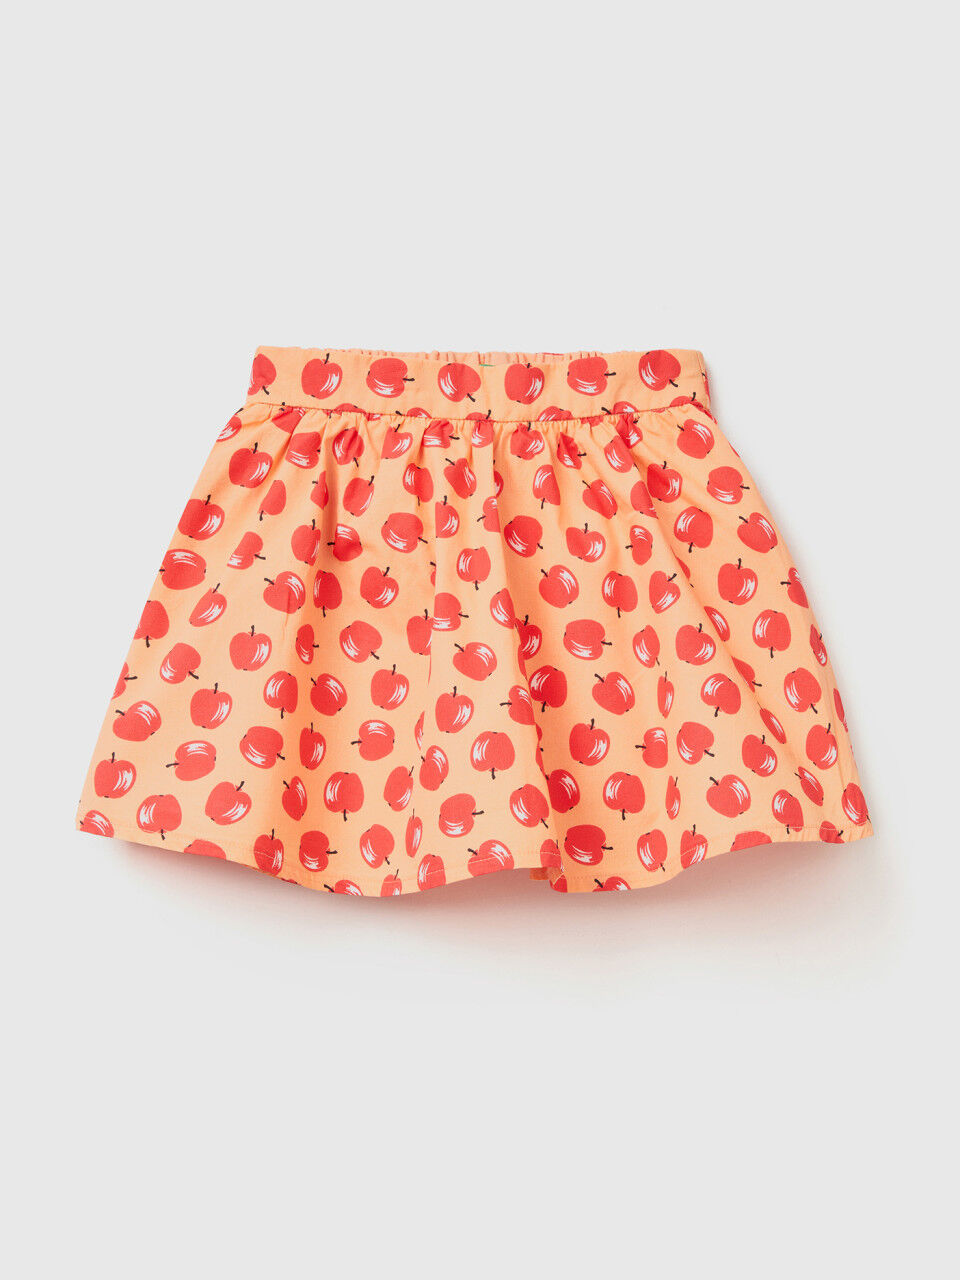 Pink skirt with apple pattern